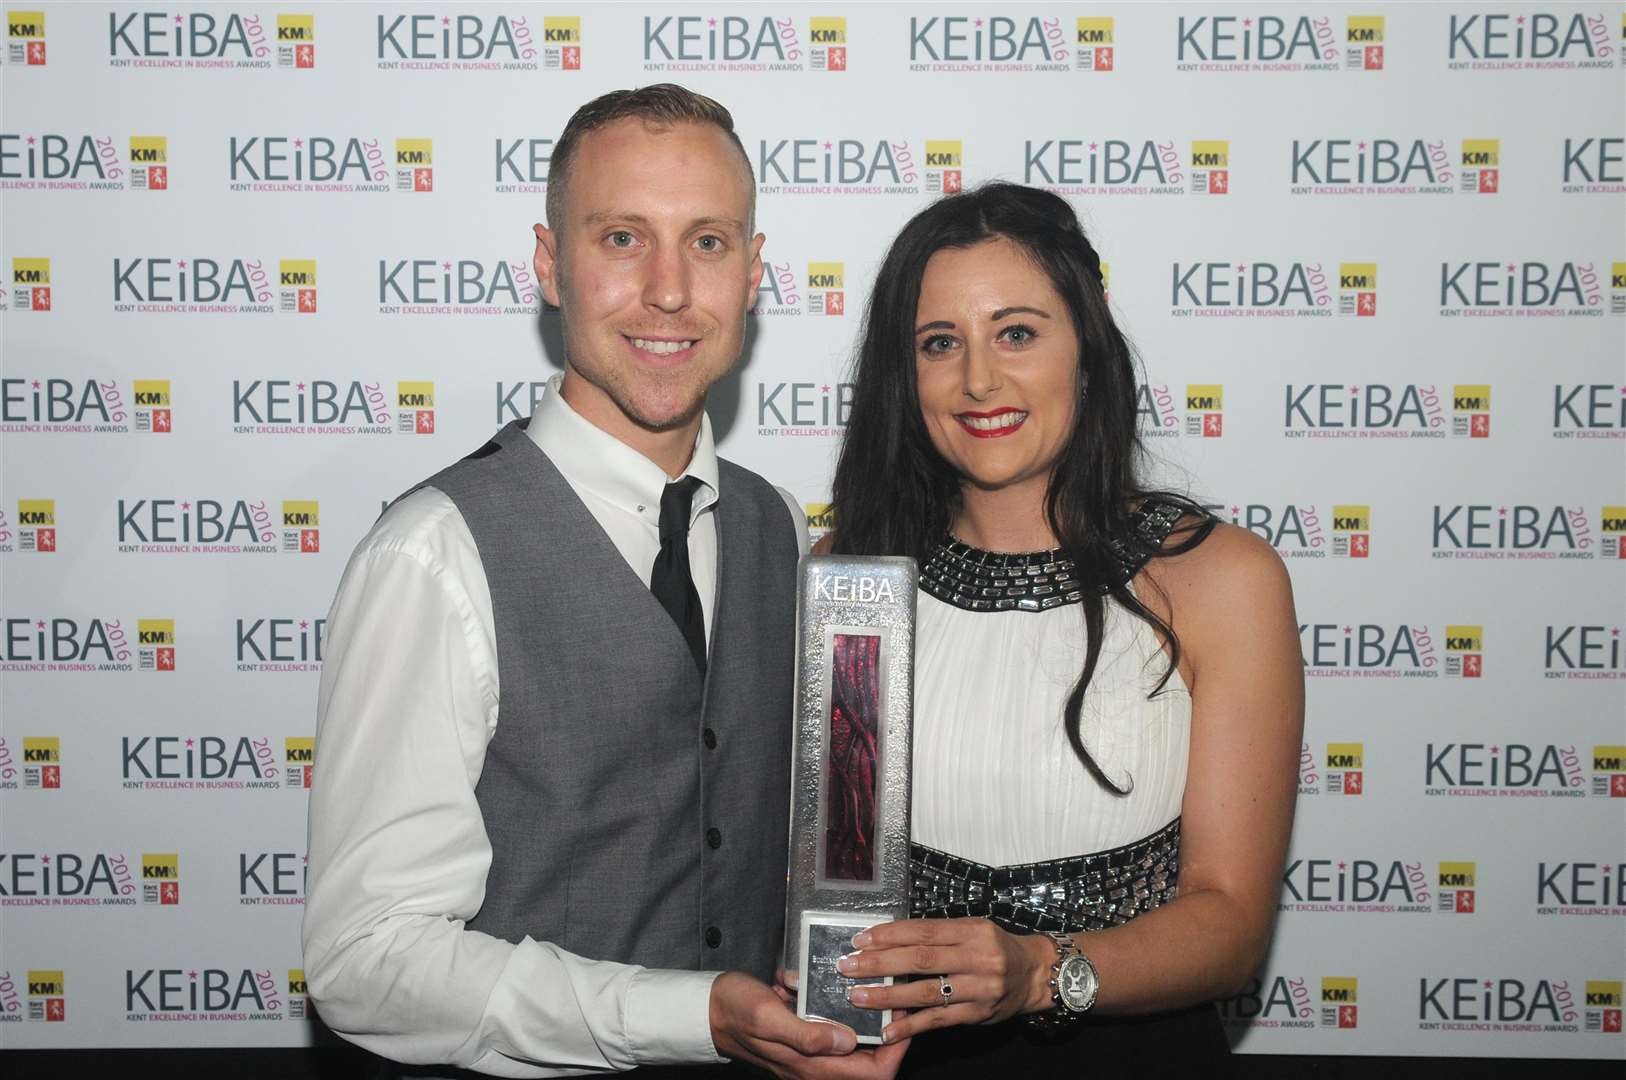 James and India Maybourn from James Fitness, which won the Business Commitment to the Community Award